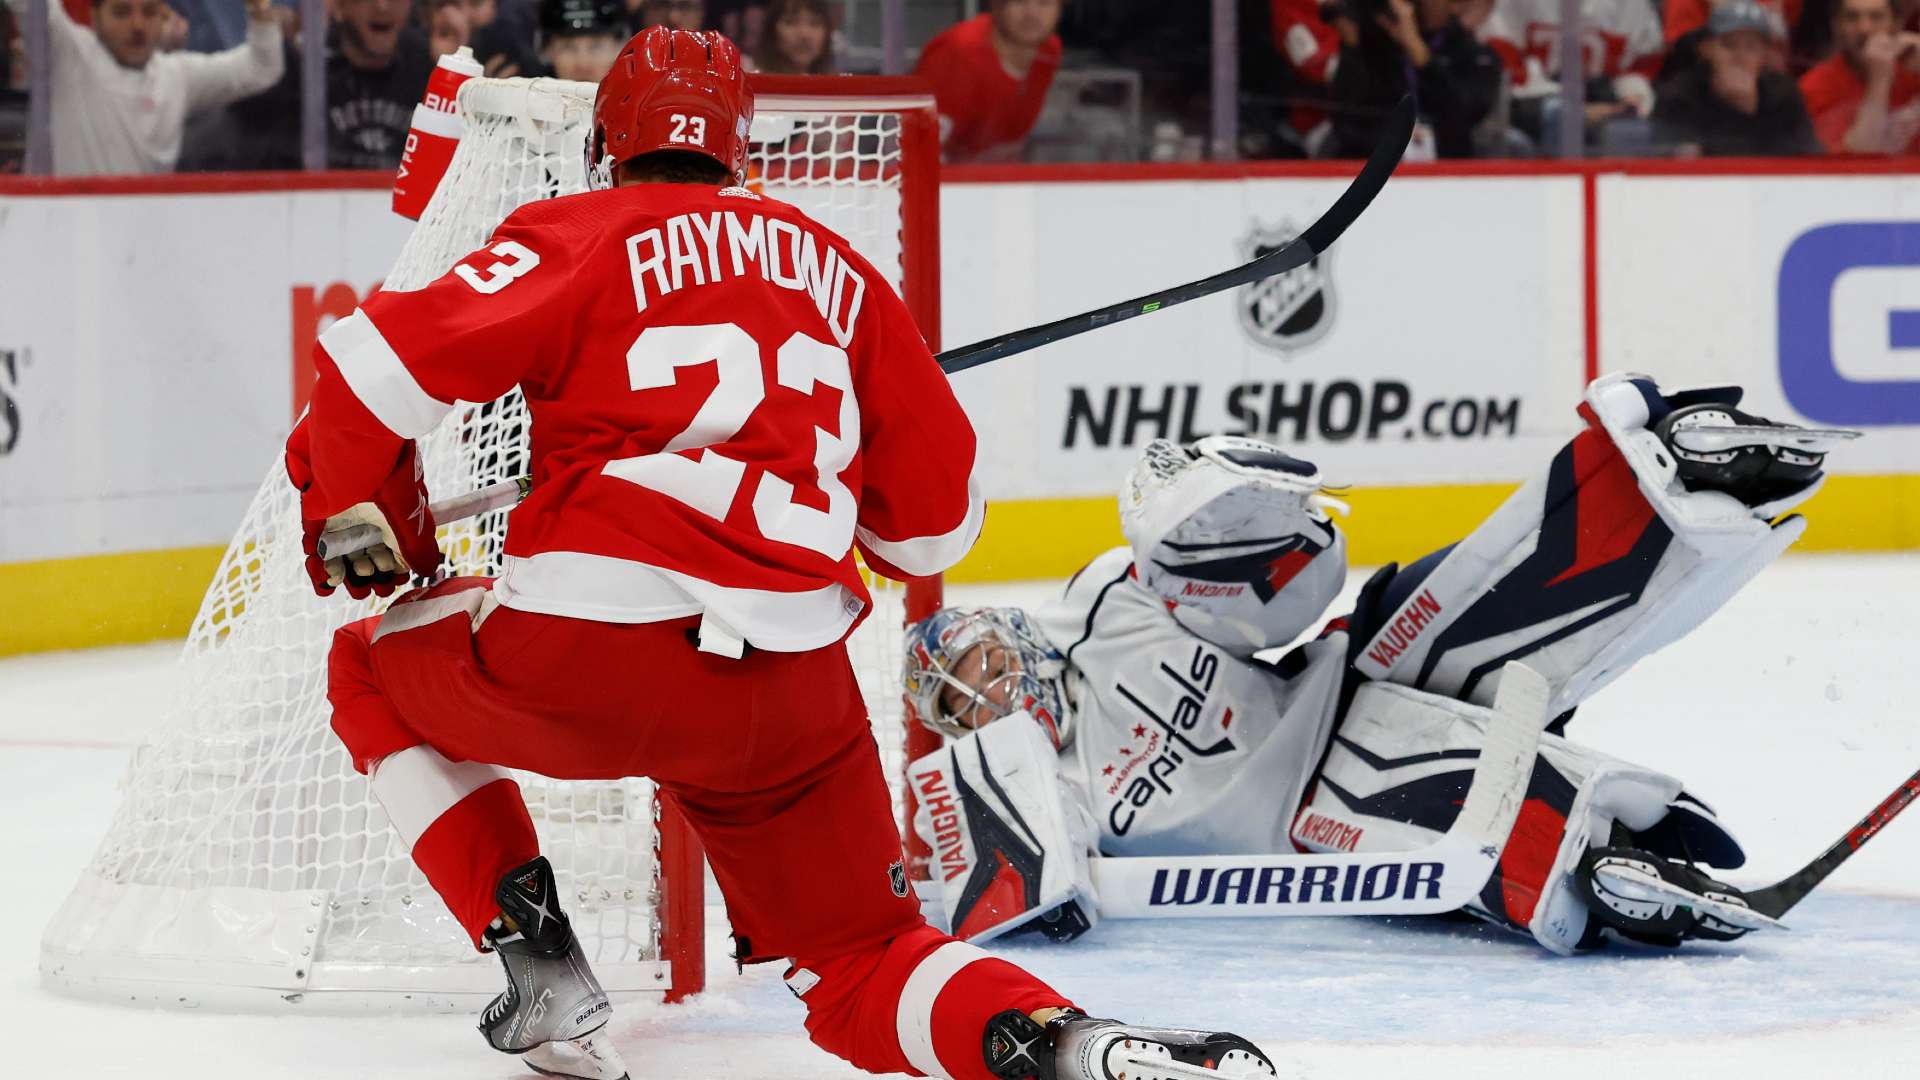 Red Wings forward Lucas Raymond scored against Capitals goalie Darcy Kuemper